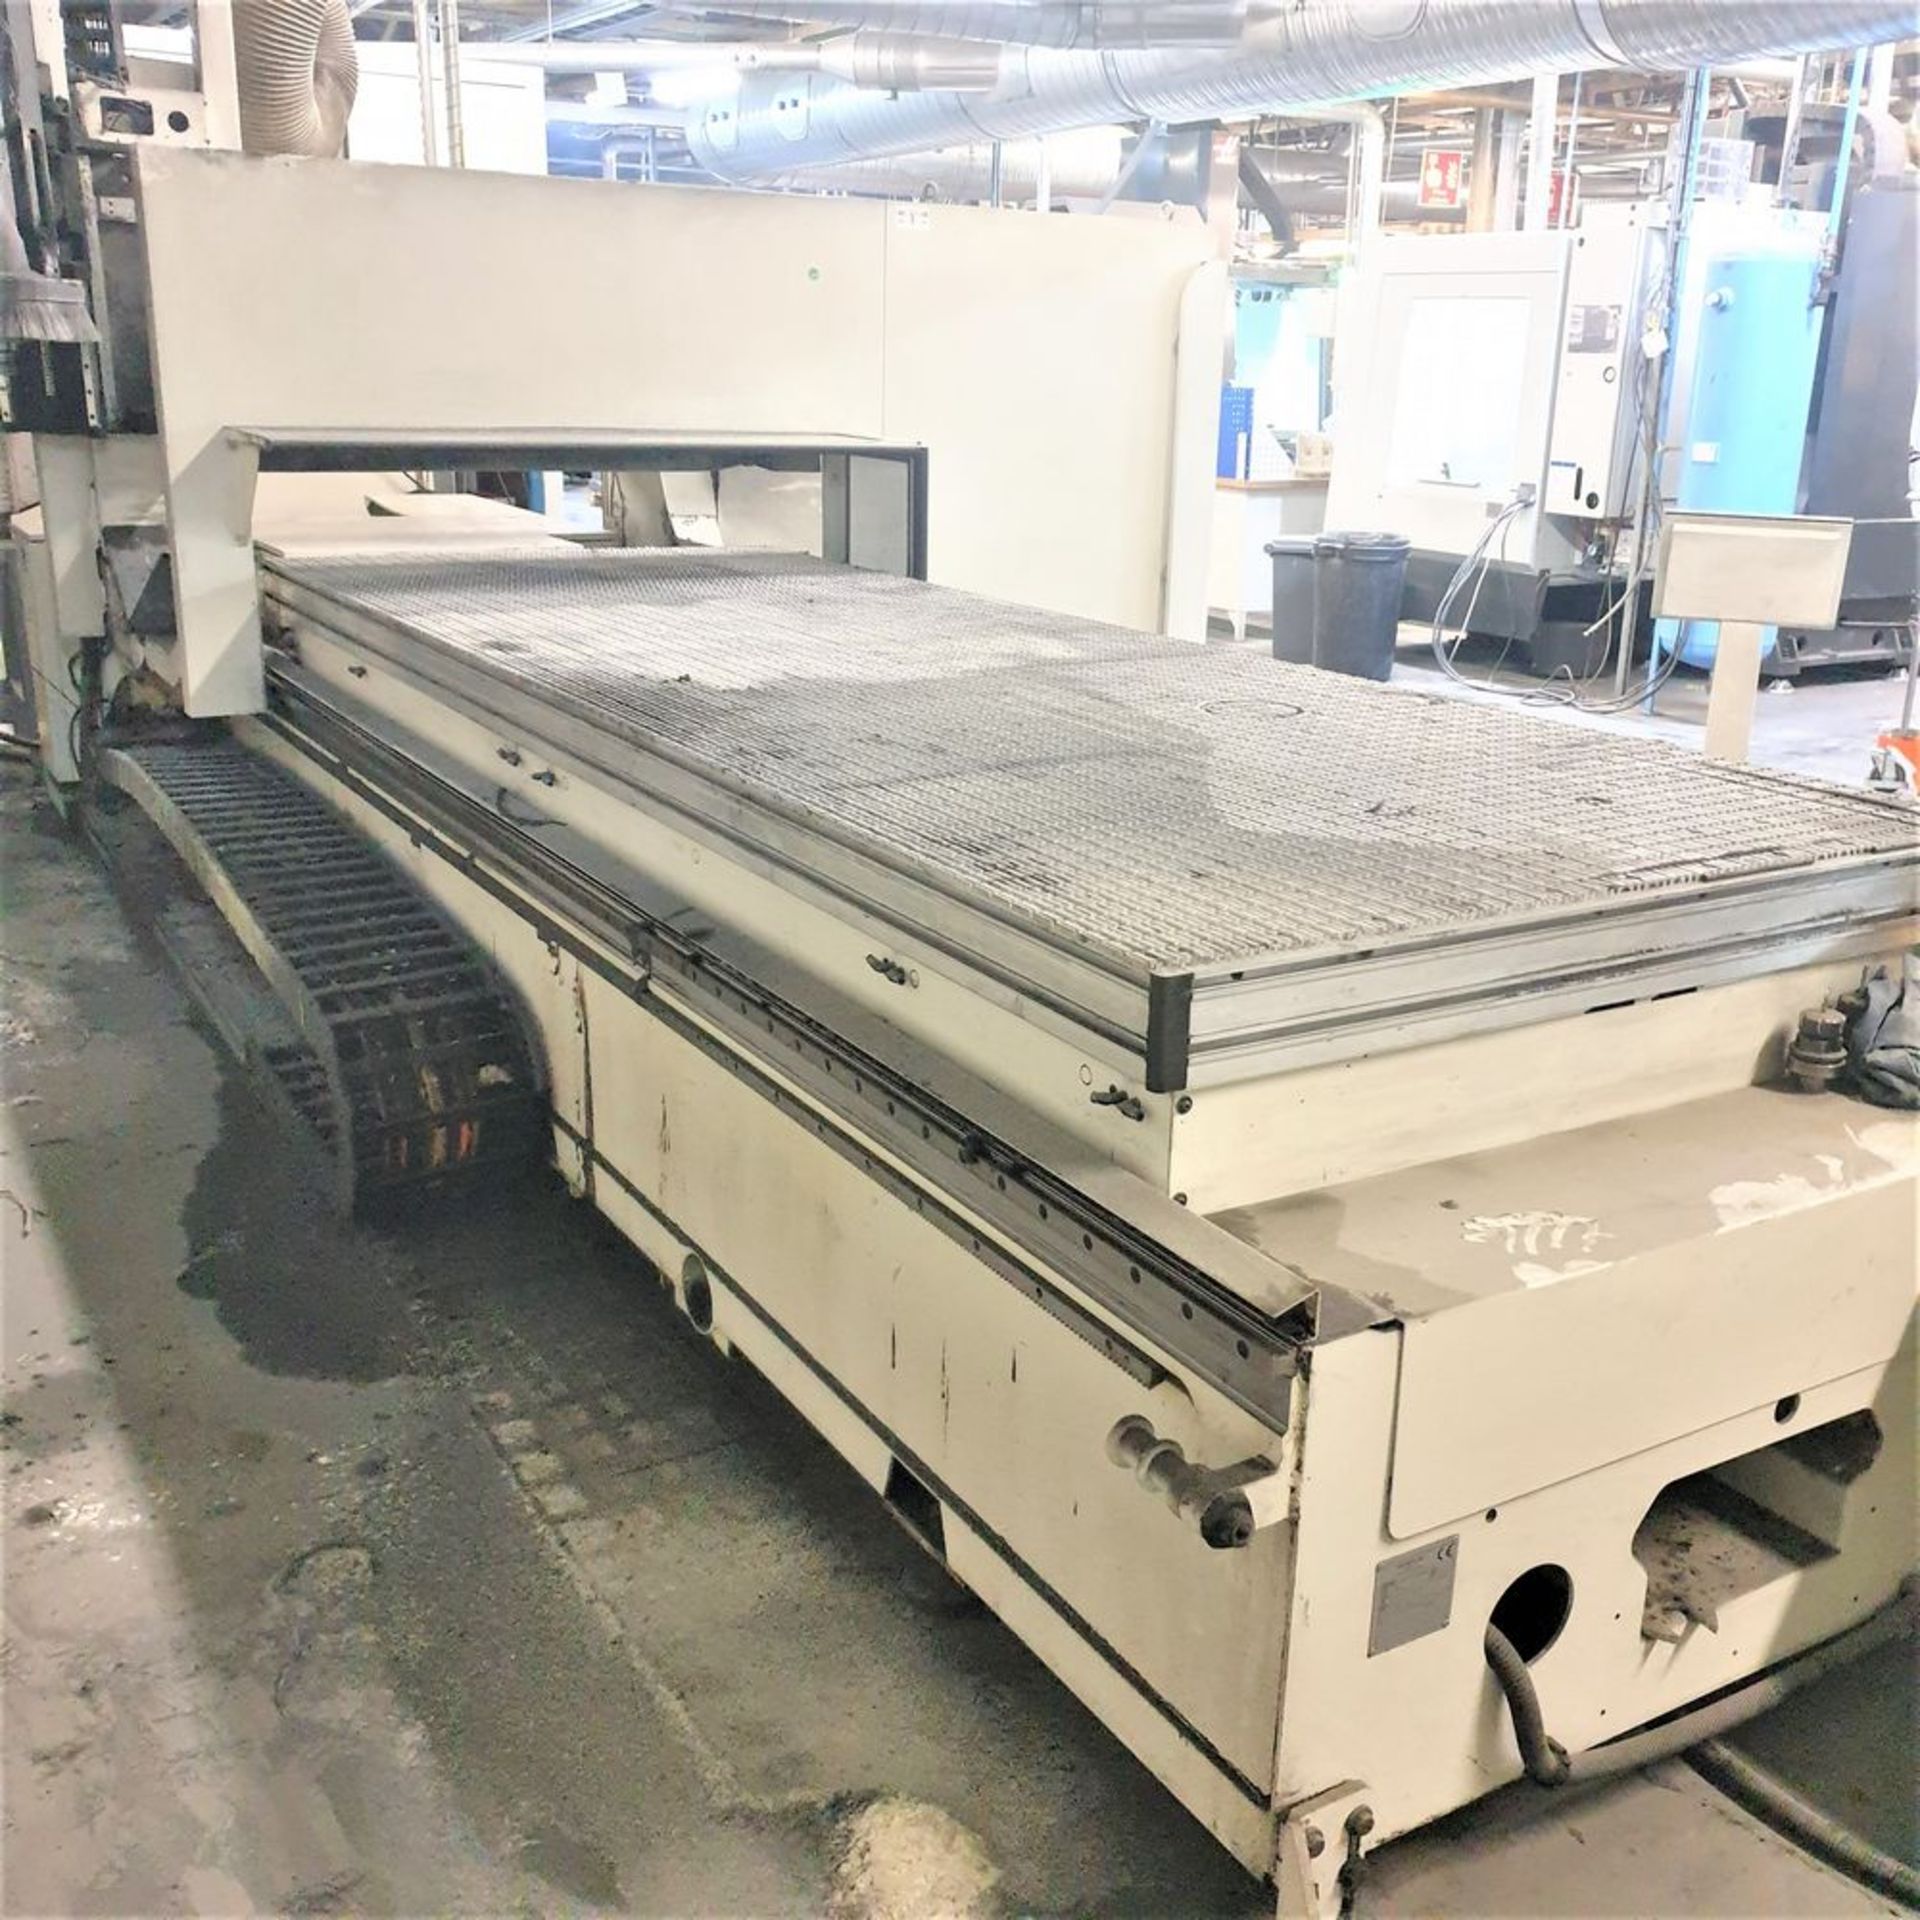 12'X54" SCM ACCORD FX-M 3-AXIS CNC ROUTER, S/N AA2/002685, NEW 2013 - Image 10 of 10